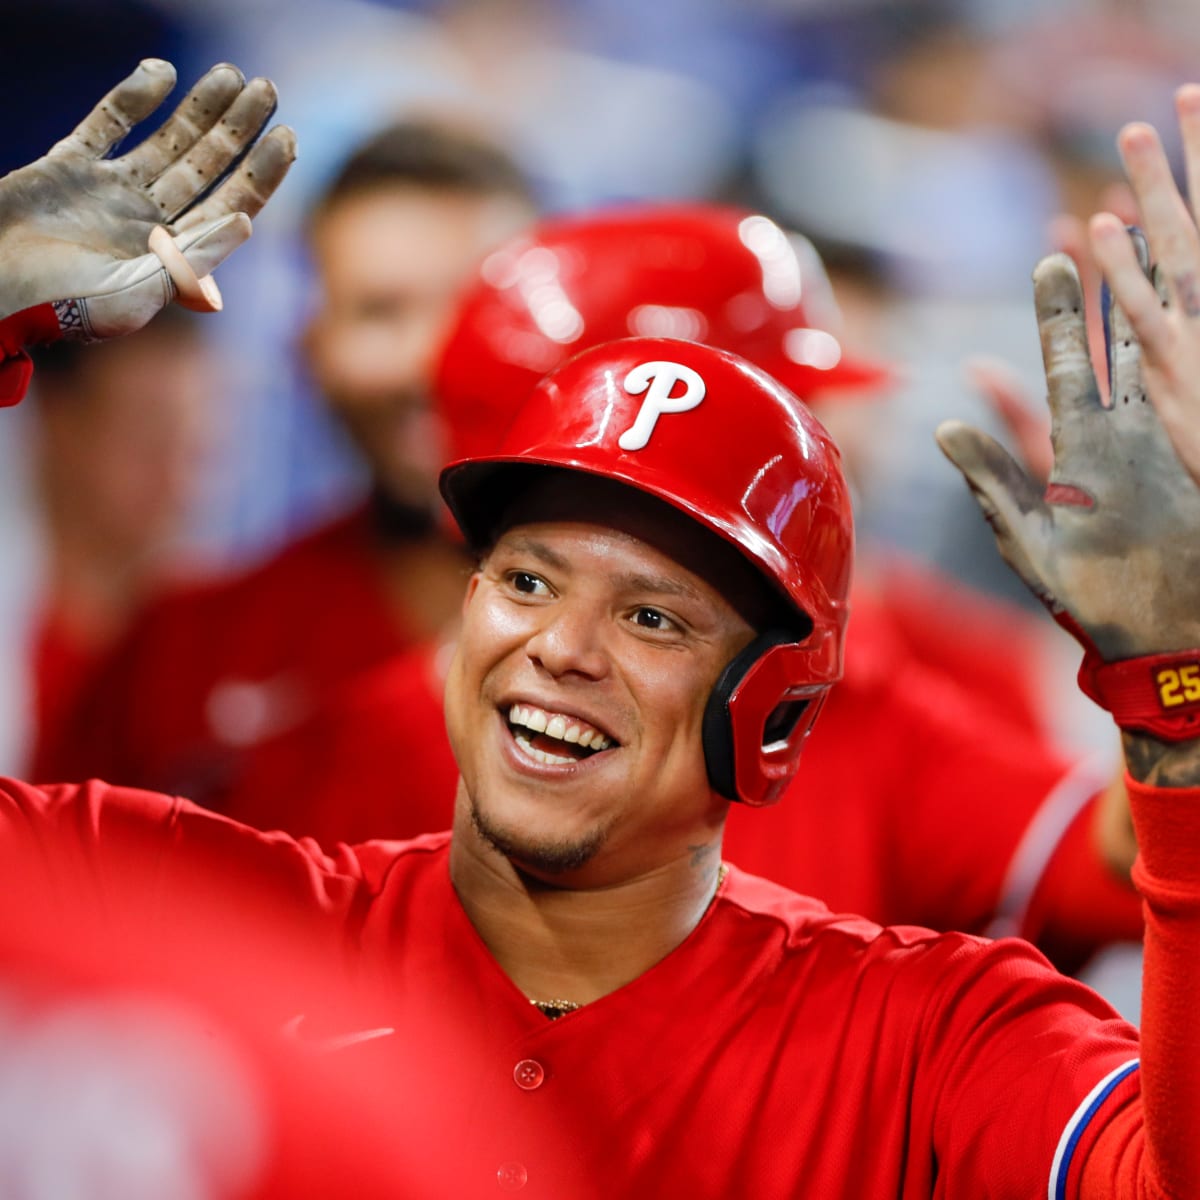 Rookie Darick Hall enjoying 'overwhelming' support as new Phils slugger   Phillies Nation - Your source for Philadelphia Phillies news, opinion,  history, rumors, events, and other fun stuff.